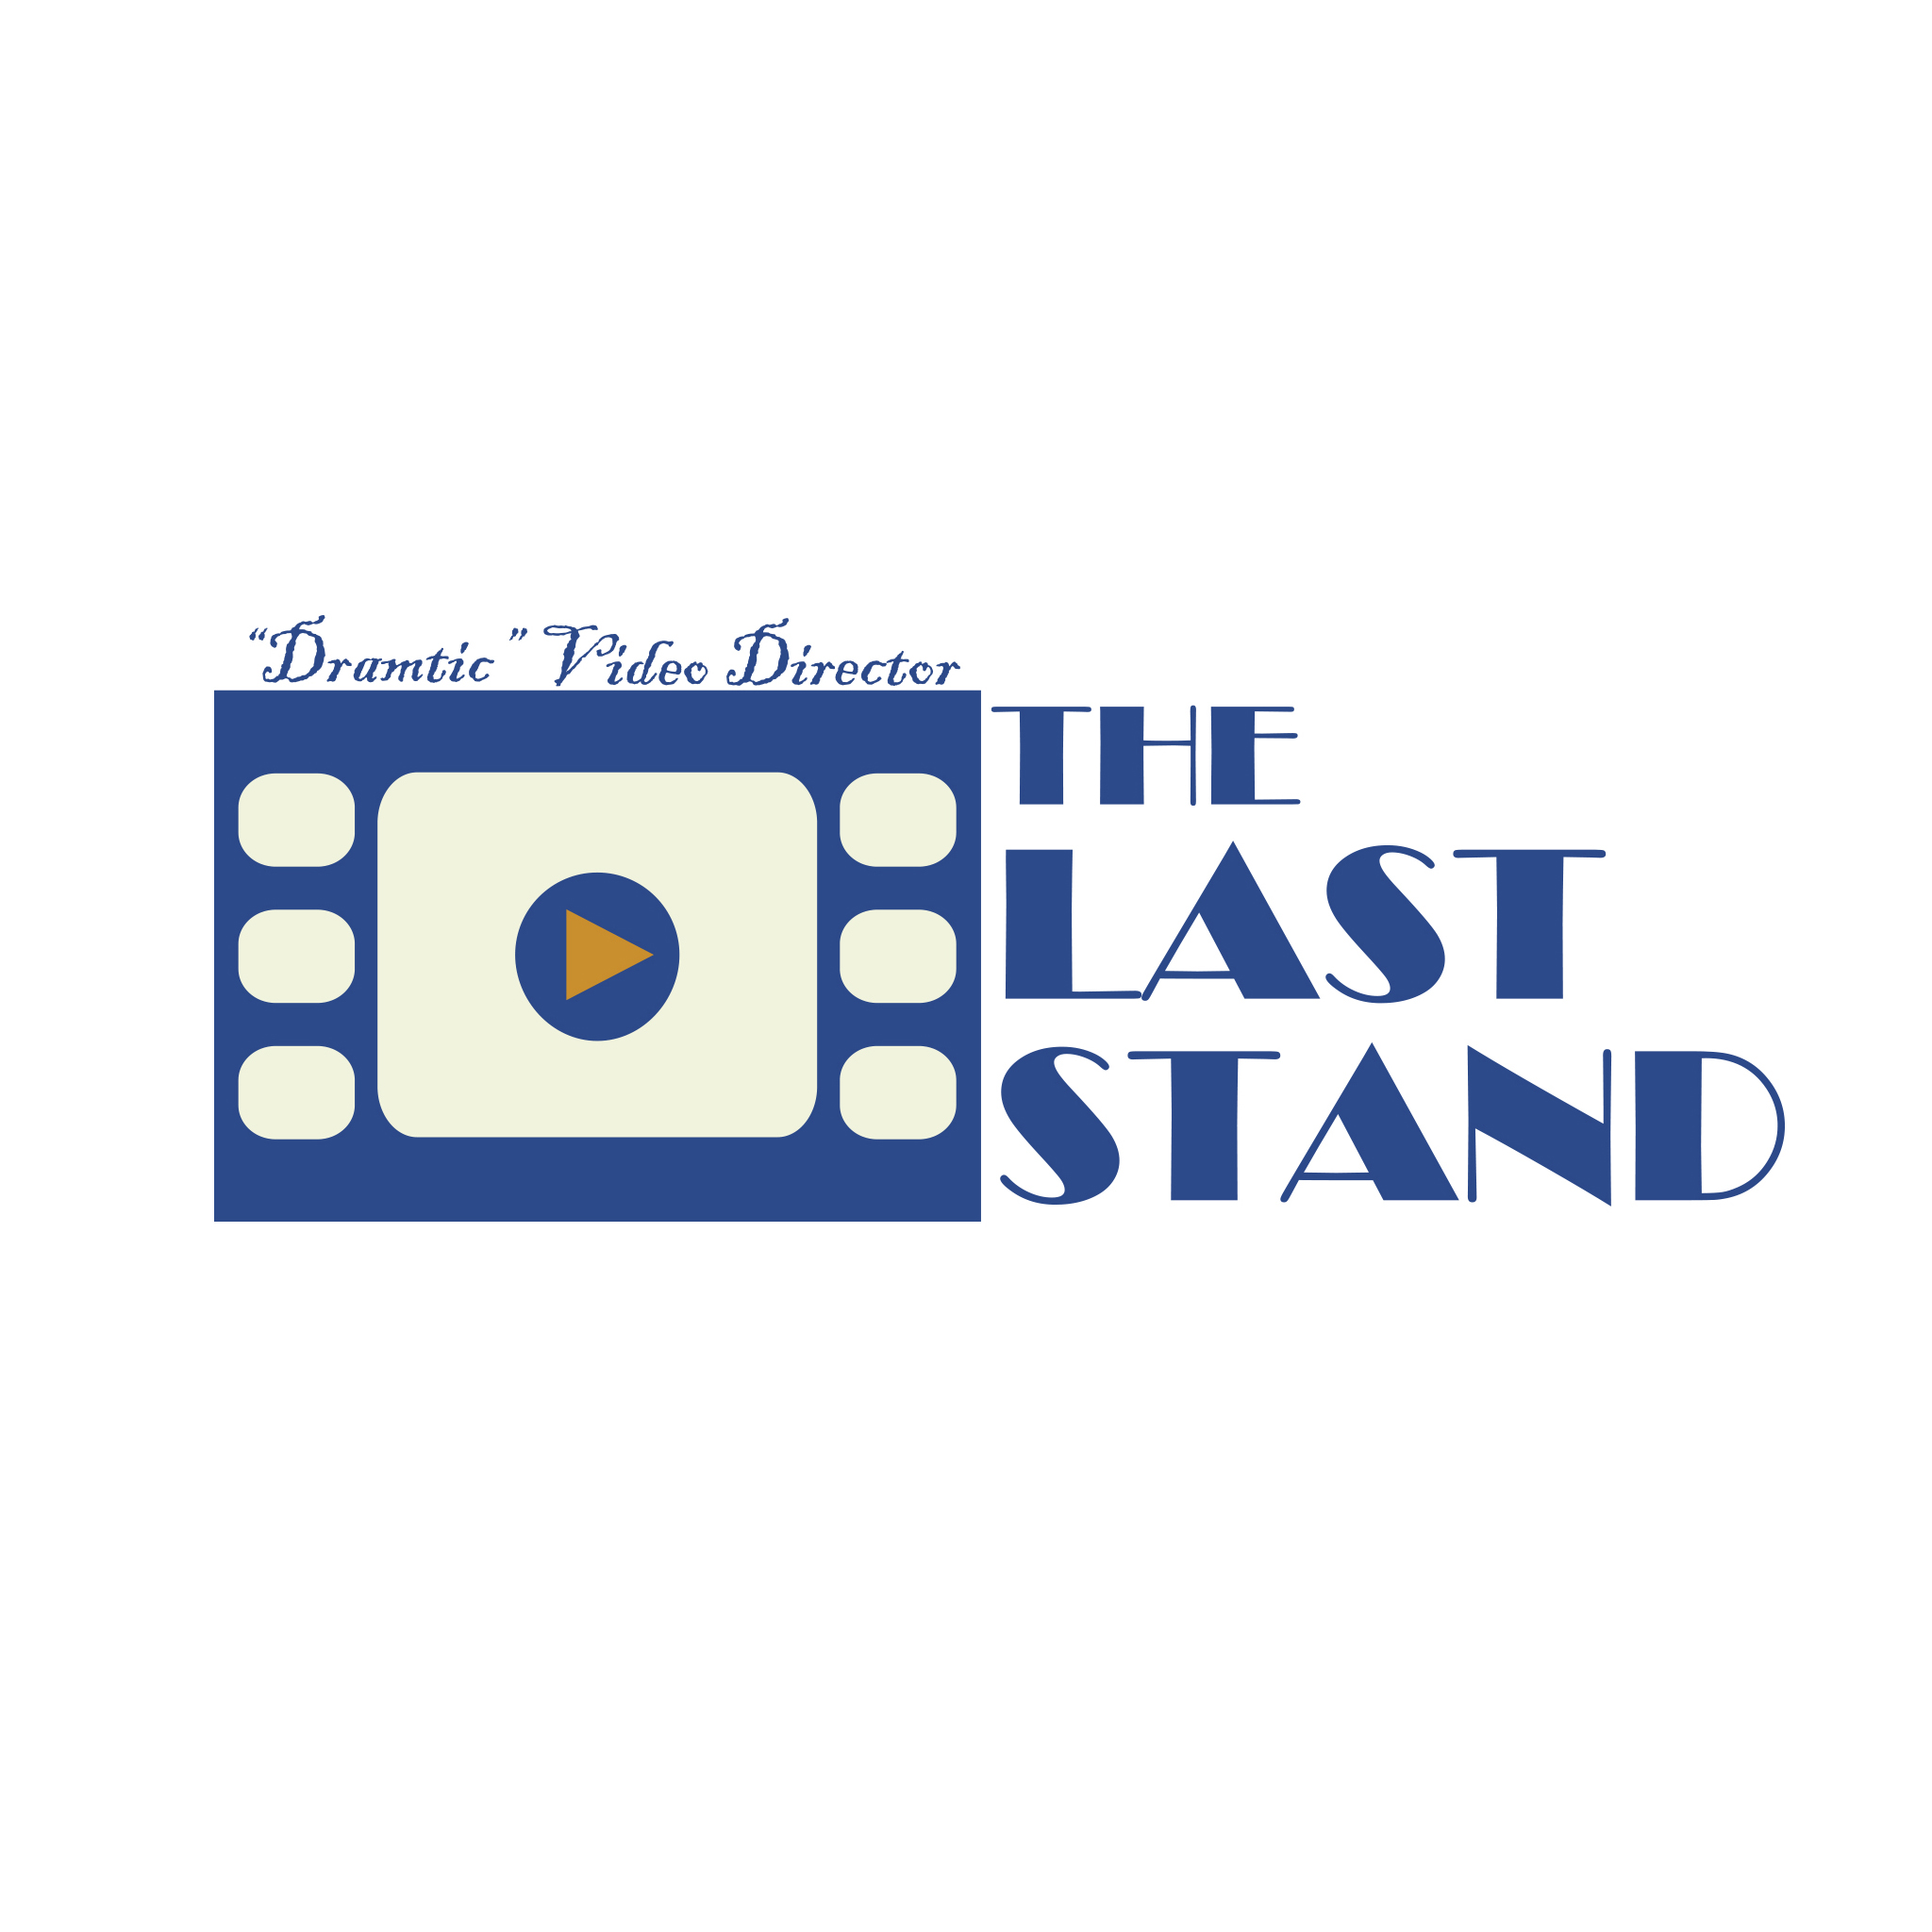 THE・LAST･STAND.